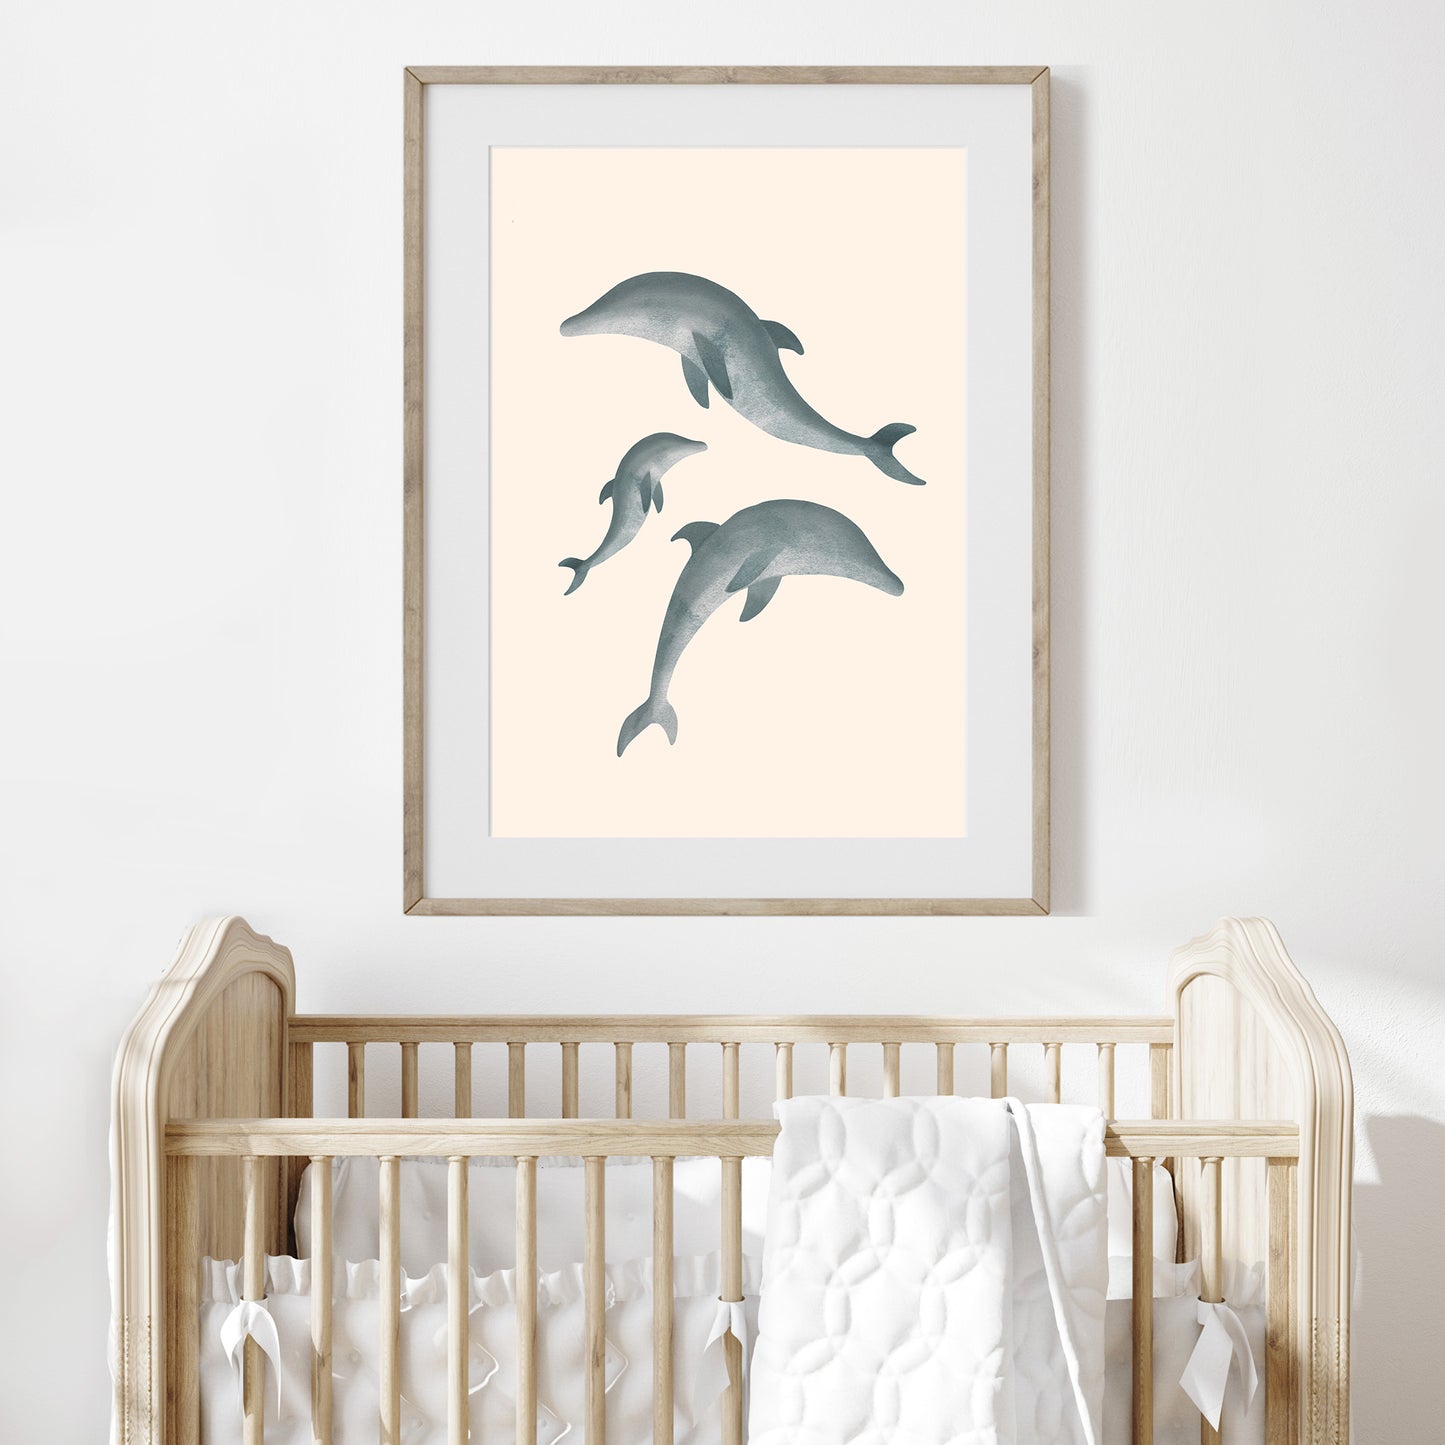 'Whales Sharks and Dolphins' | Set of 3 Wall Art Prints